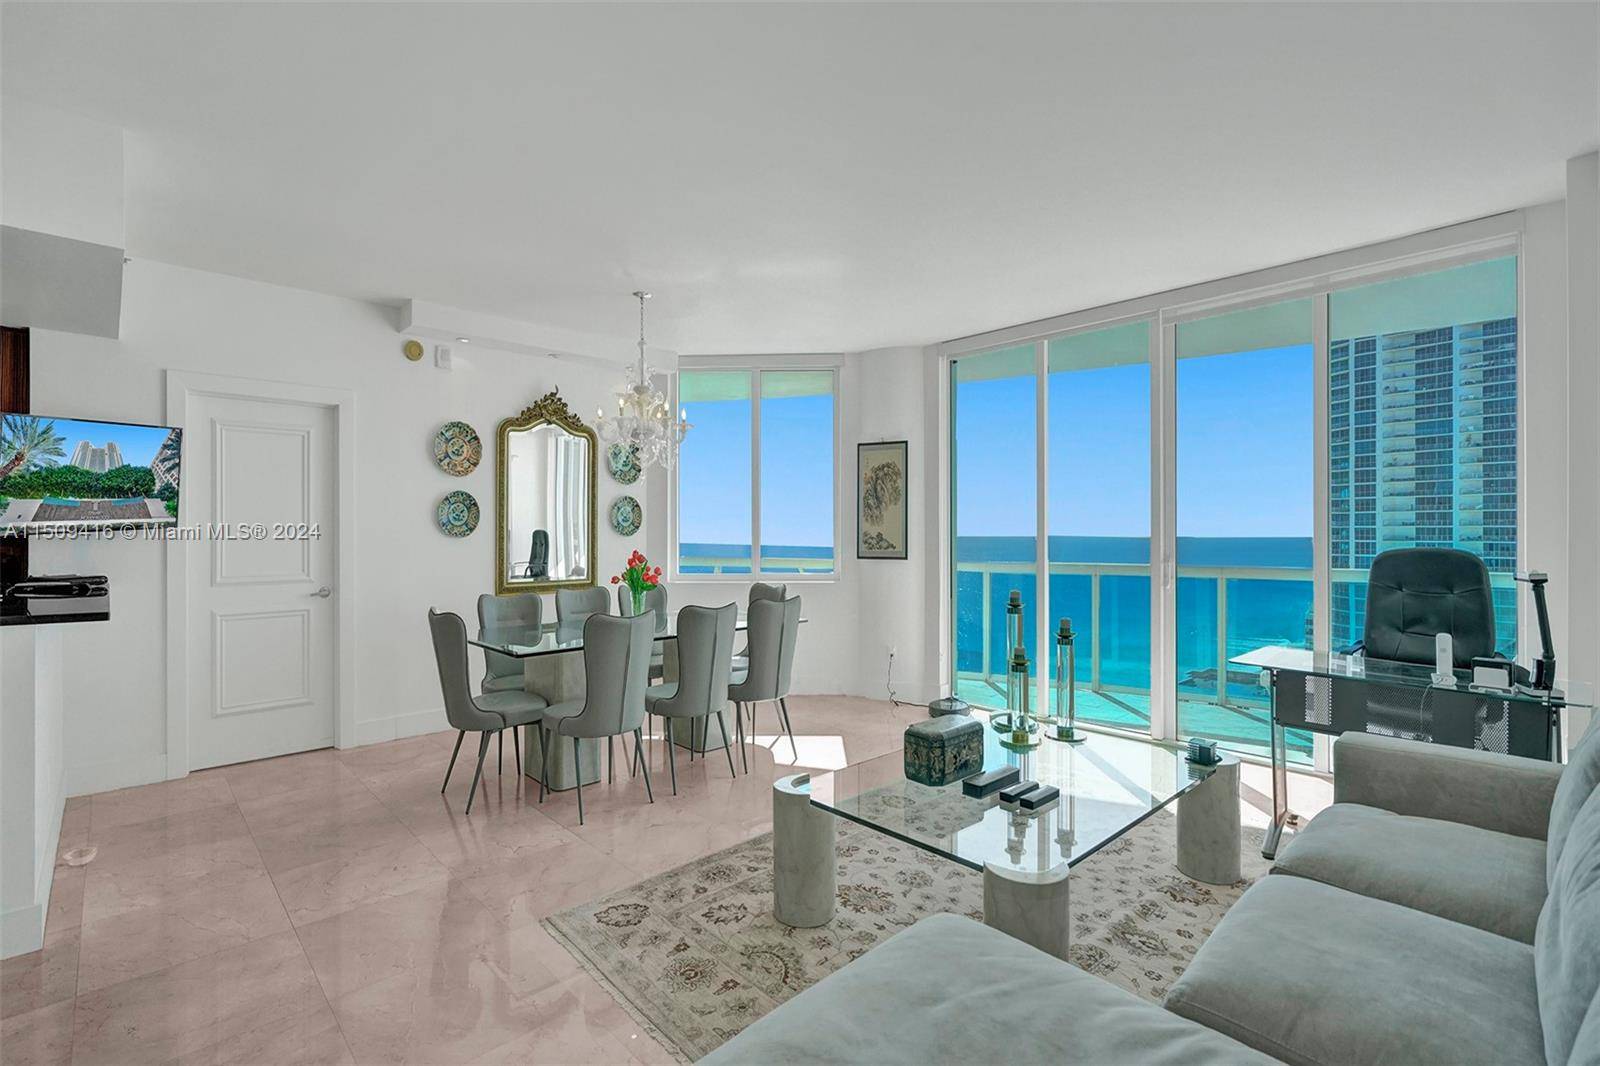 ENTER DOUBLE DOOR TO PRIVATE ELEVATOR FOYER IMMEDIATELY THROUGHOUT SEE FABULOUS OCEAN VIEWS FROM EVERY ROOM.